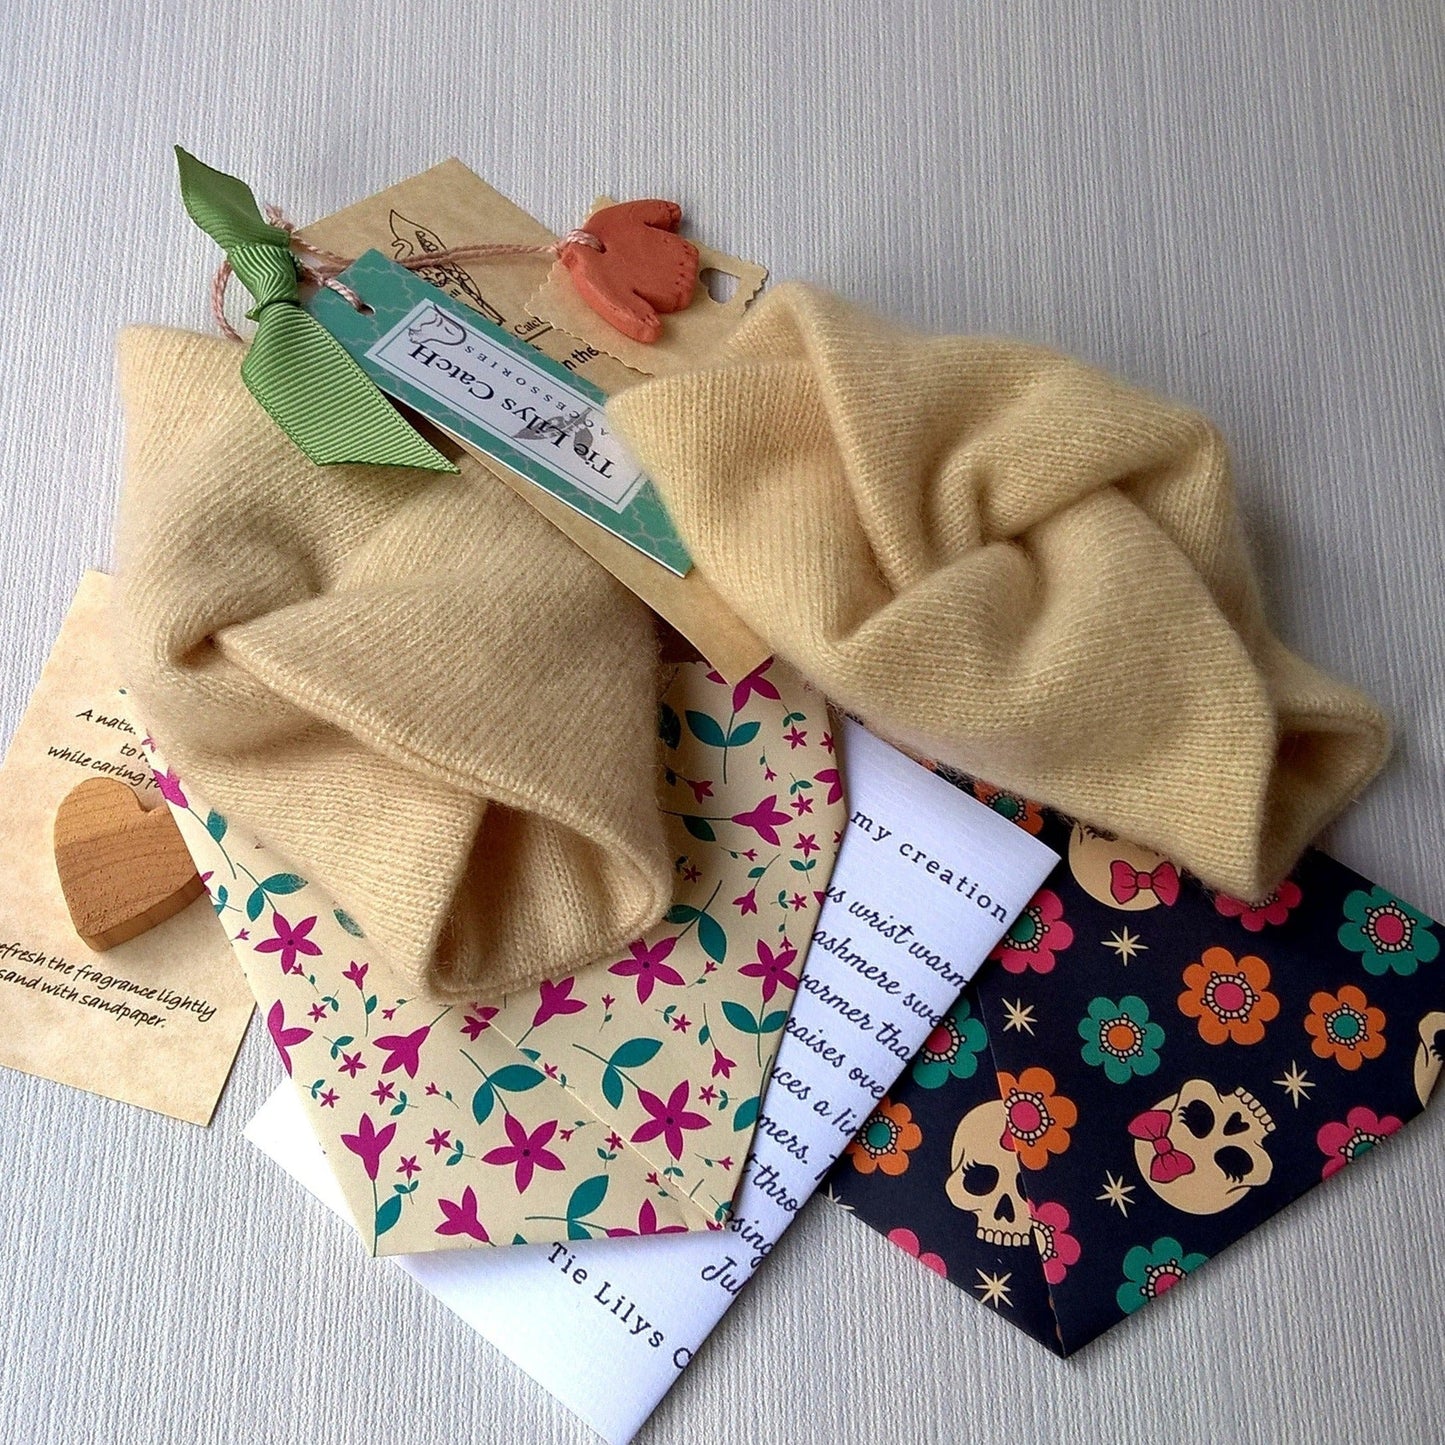 Cream 100% cashmere wrist warmers with packaging